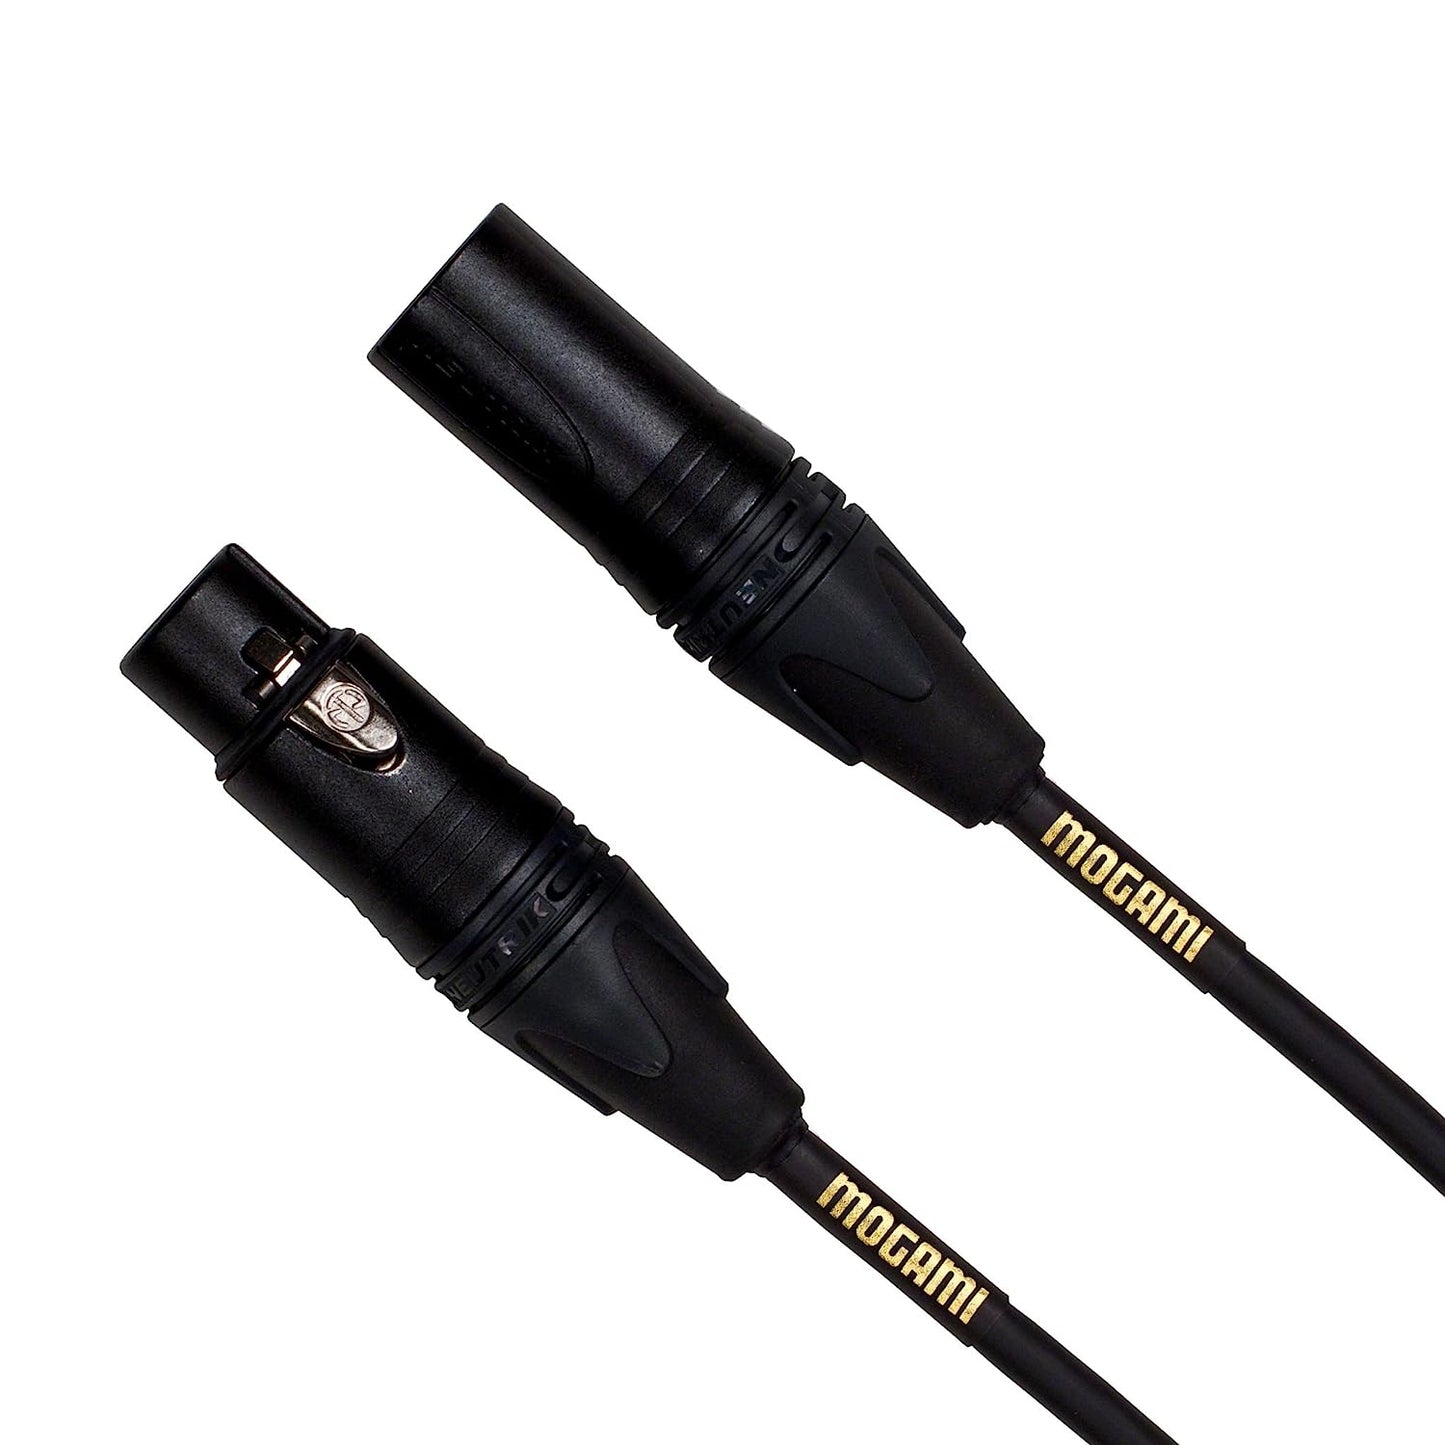 Mogami Gold STUDIO-06 XLR Microphone Cable, 6 Foot